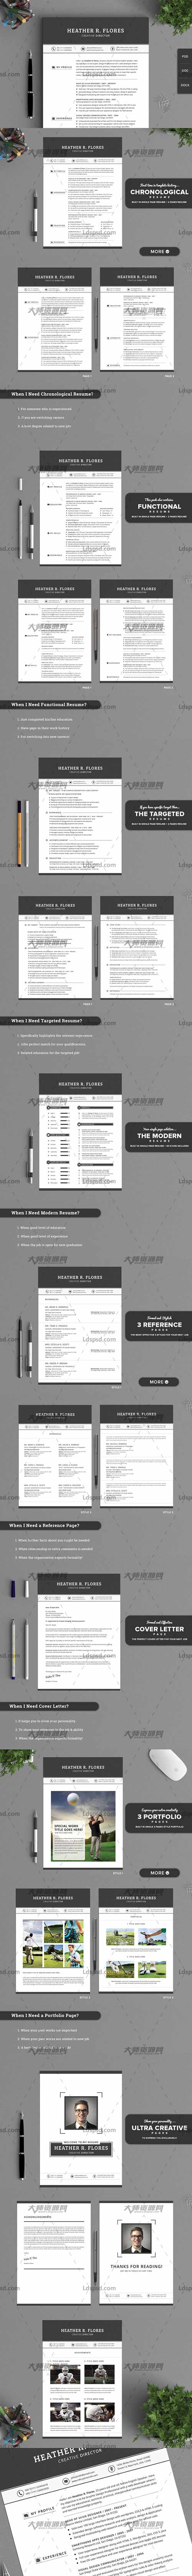 All in One Timeless Resume CV Pack,个人简历模板(INDD/DOCX/PSD)